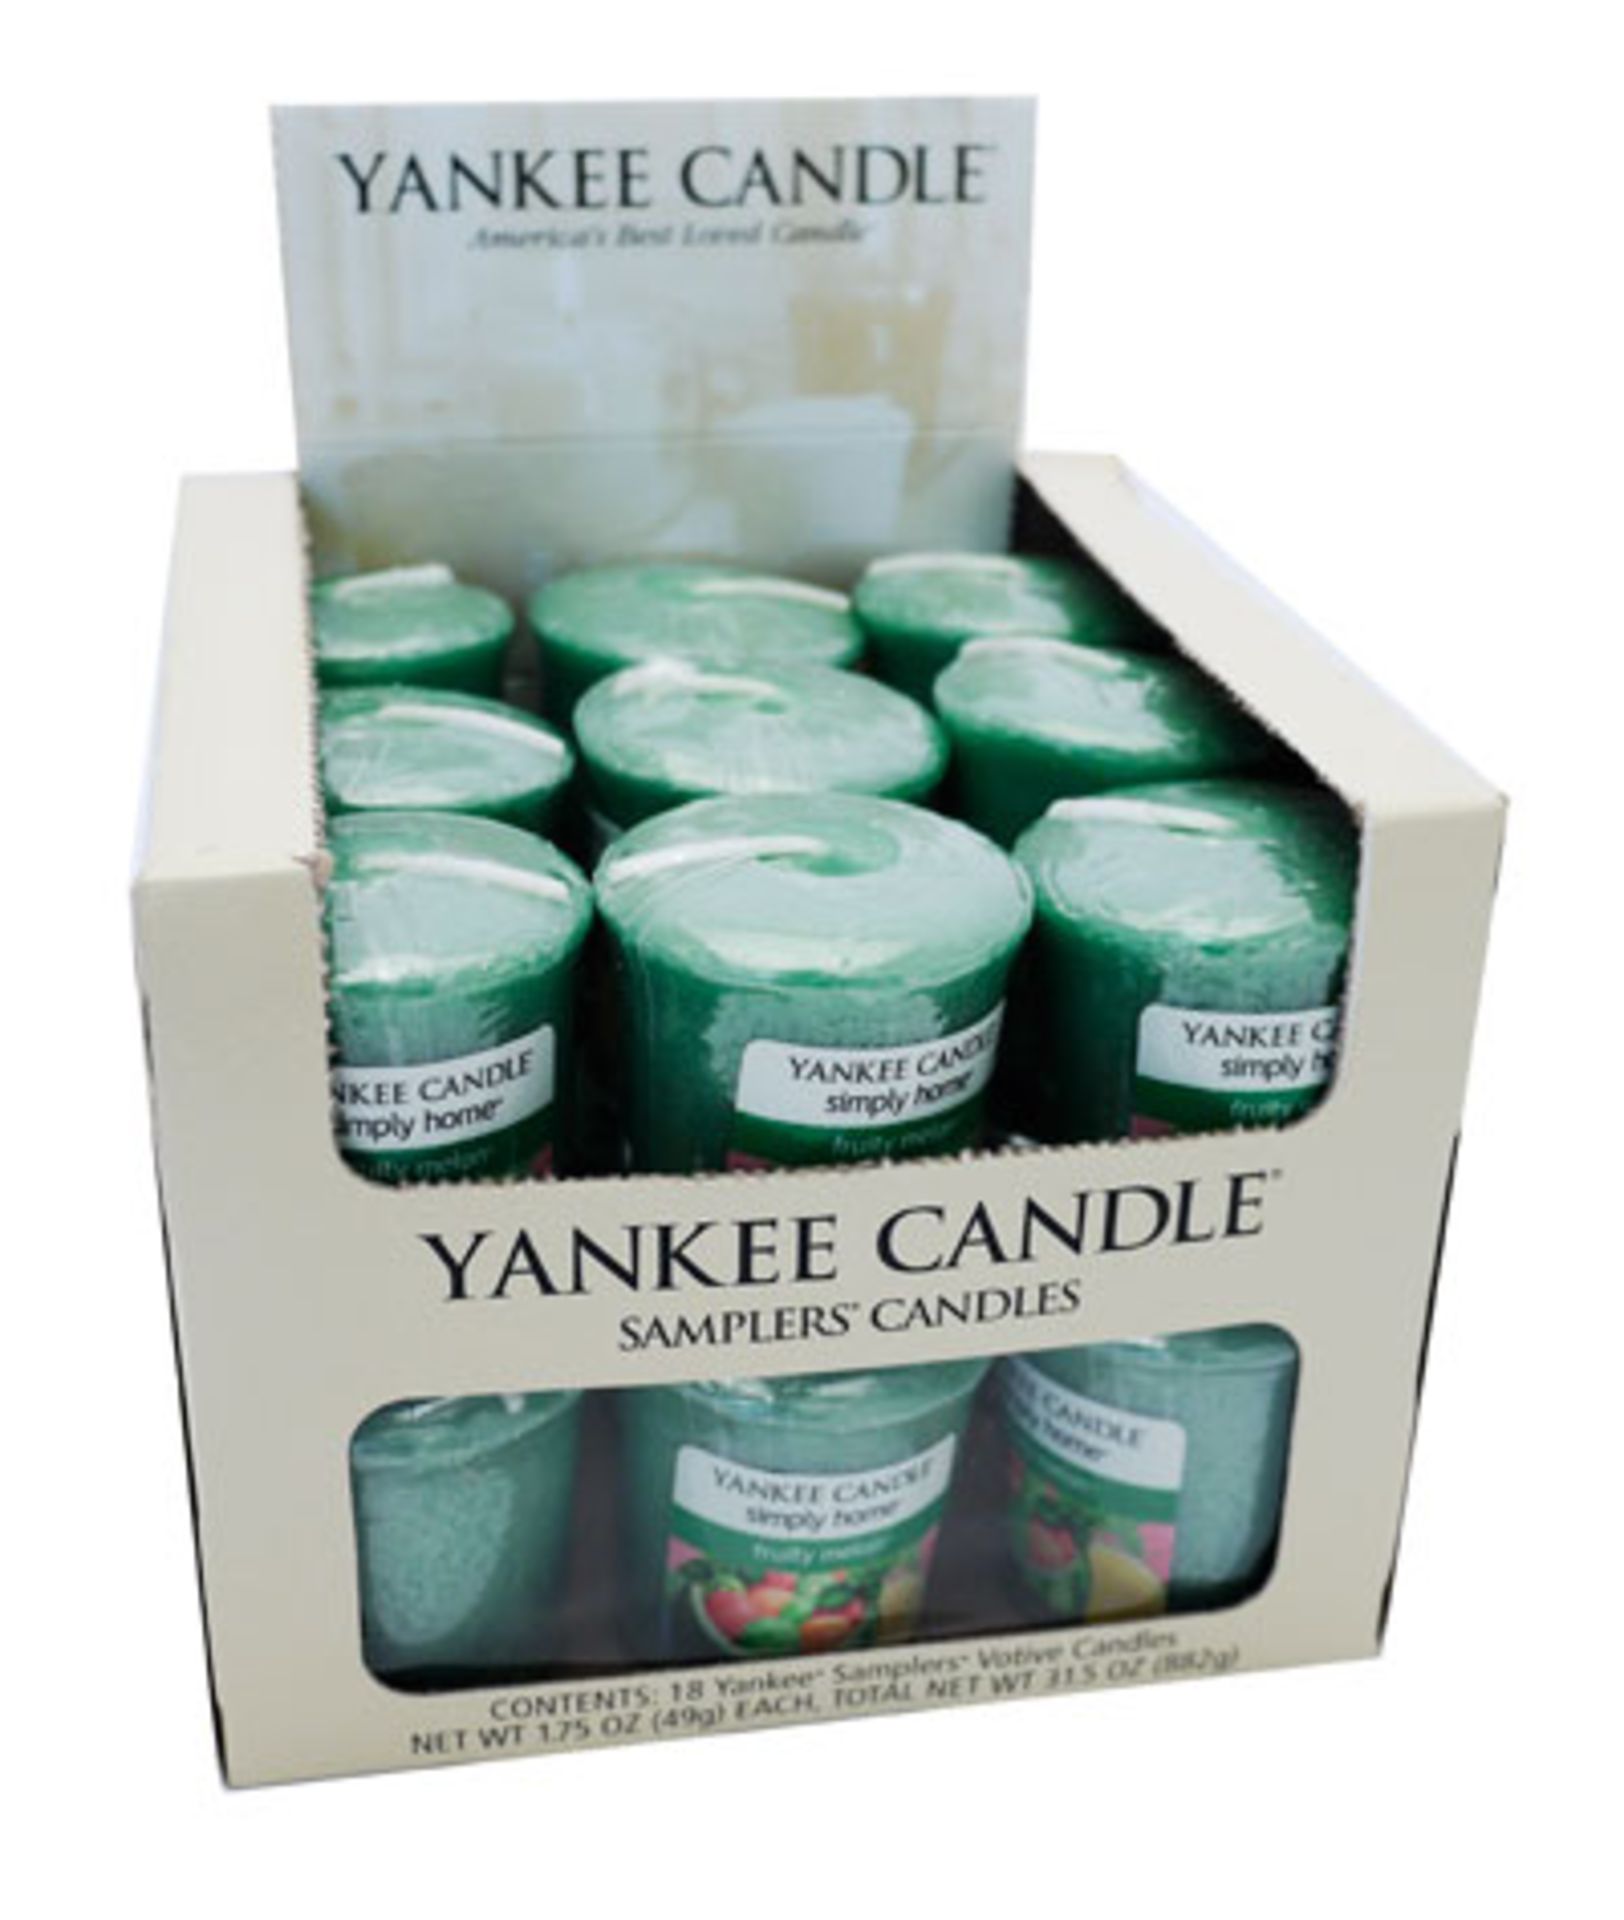 V *TRADE QTY* Brand New 18 x Yankee Candle Votive Fruity Melon 49g ISP£18.00 X 3 YOUR BID PRICE TO